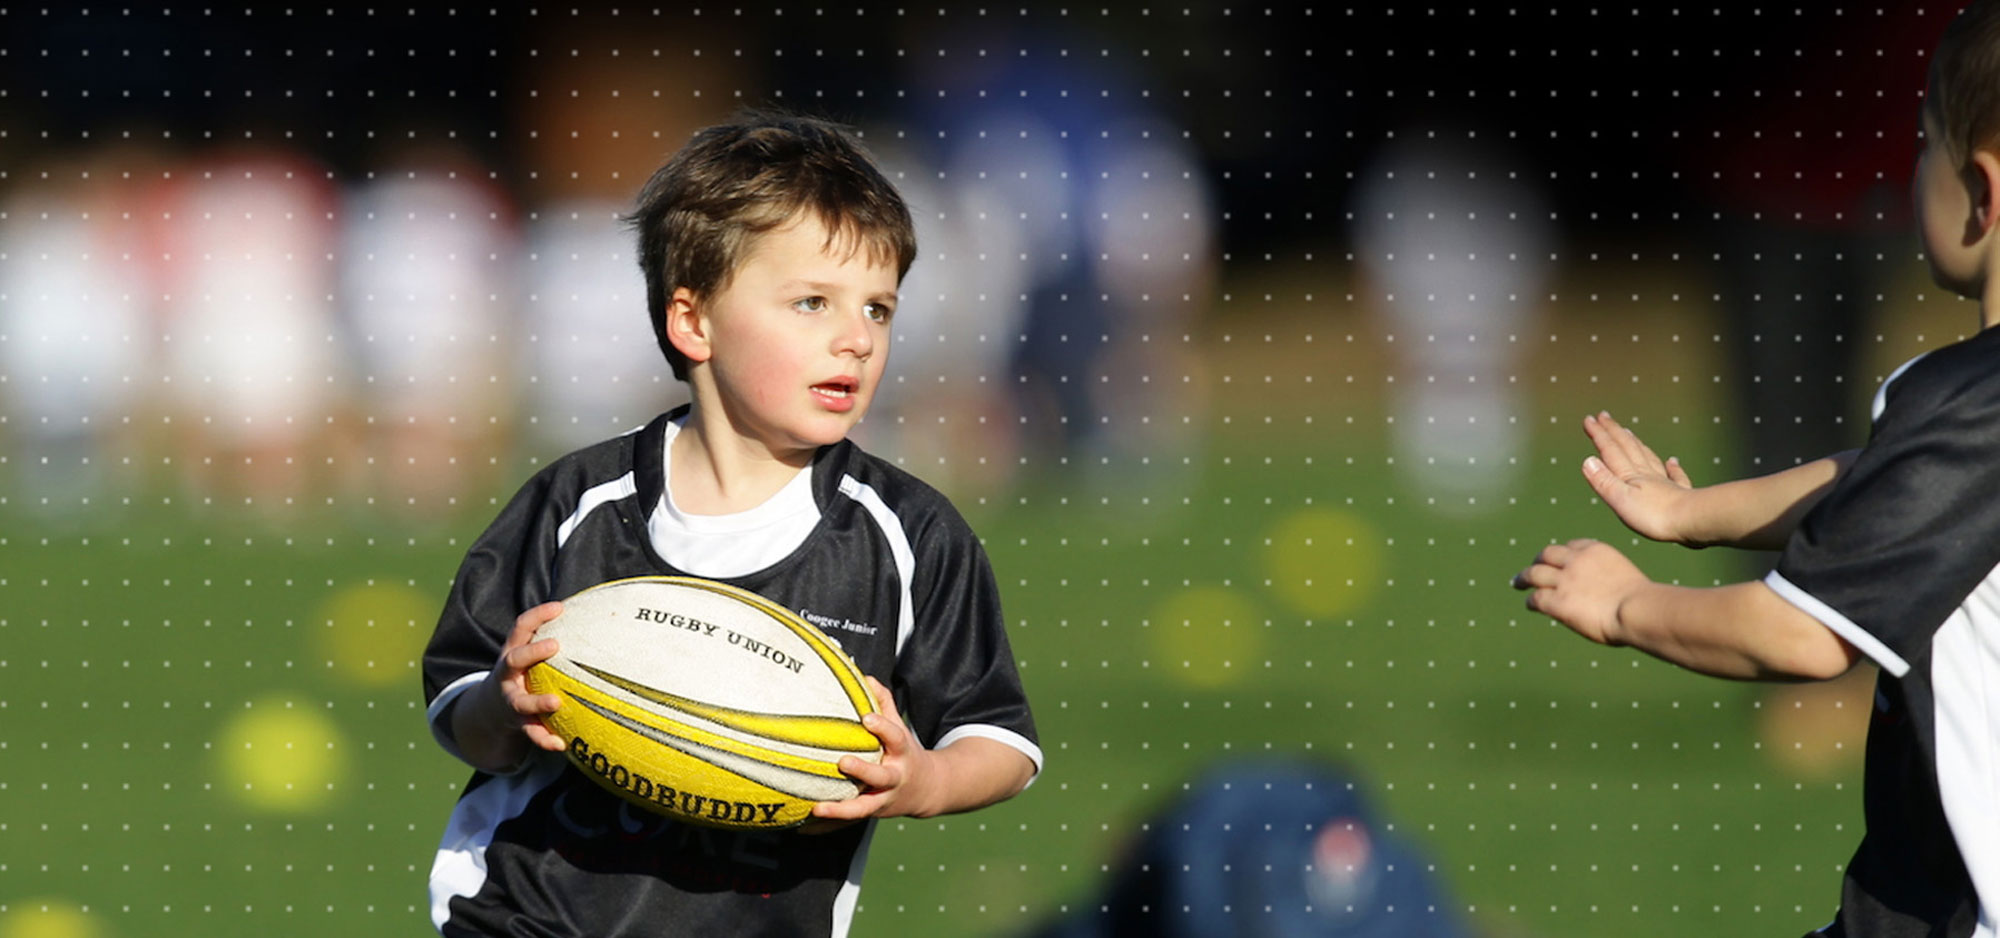  Start Now   Build a Legacy    Rugby Outreach  